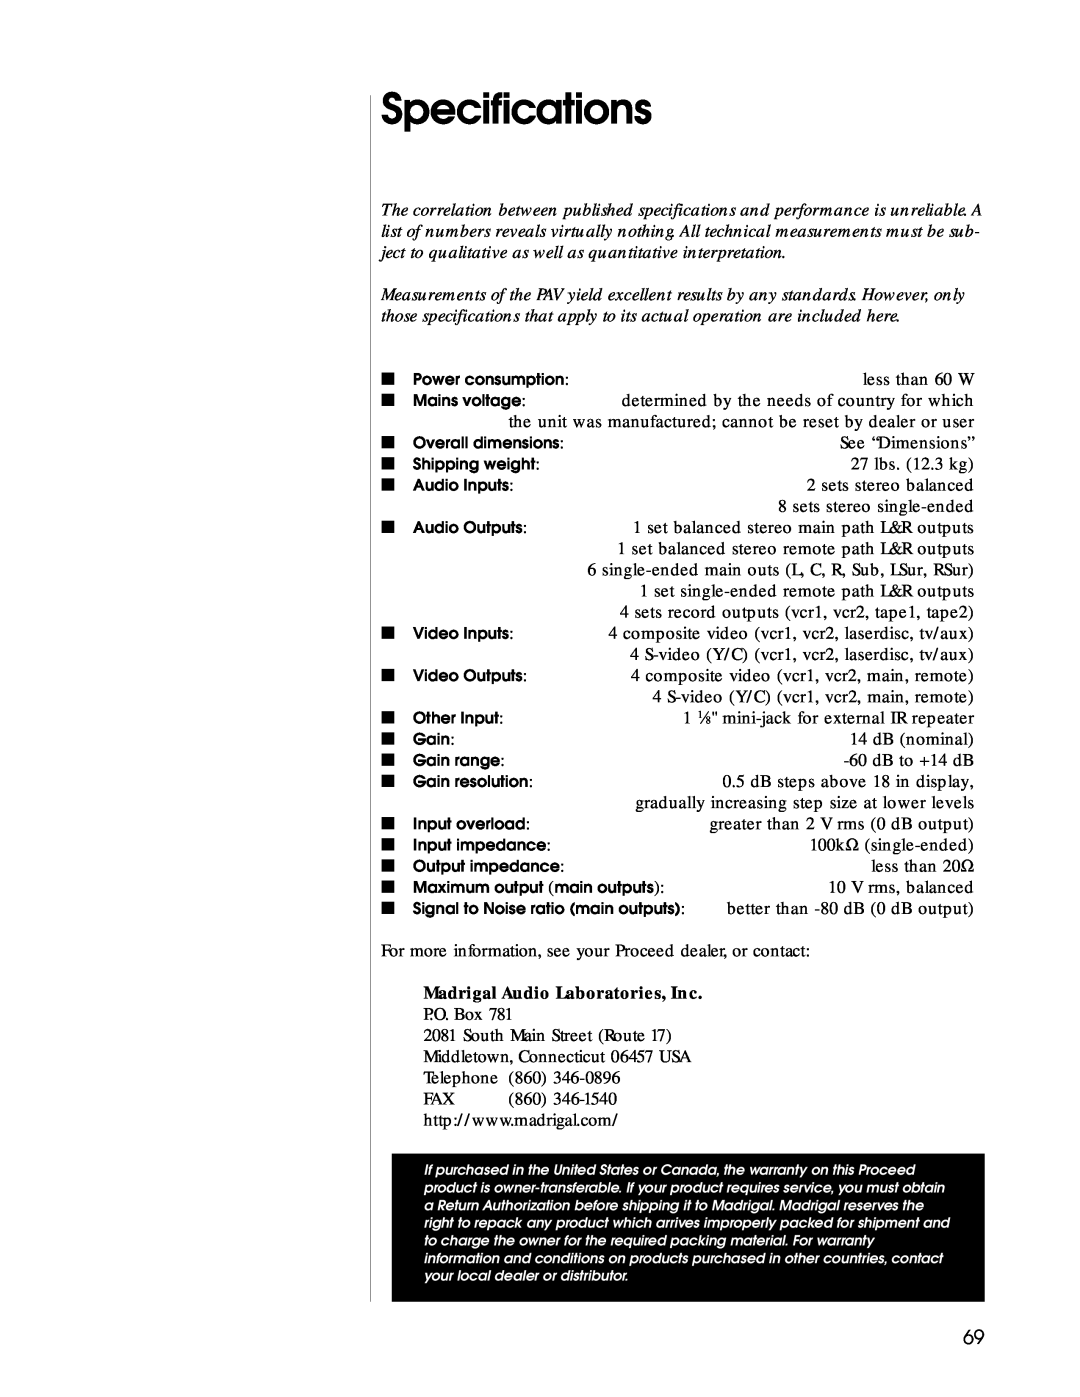 Madrigal Imaging Audio/Video Preamplifier manual Specifications, Madrigal Audio Laboratories, Inc 